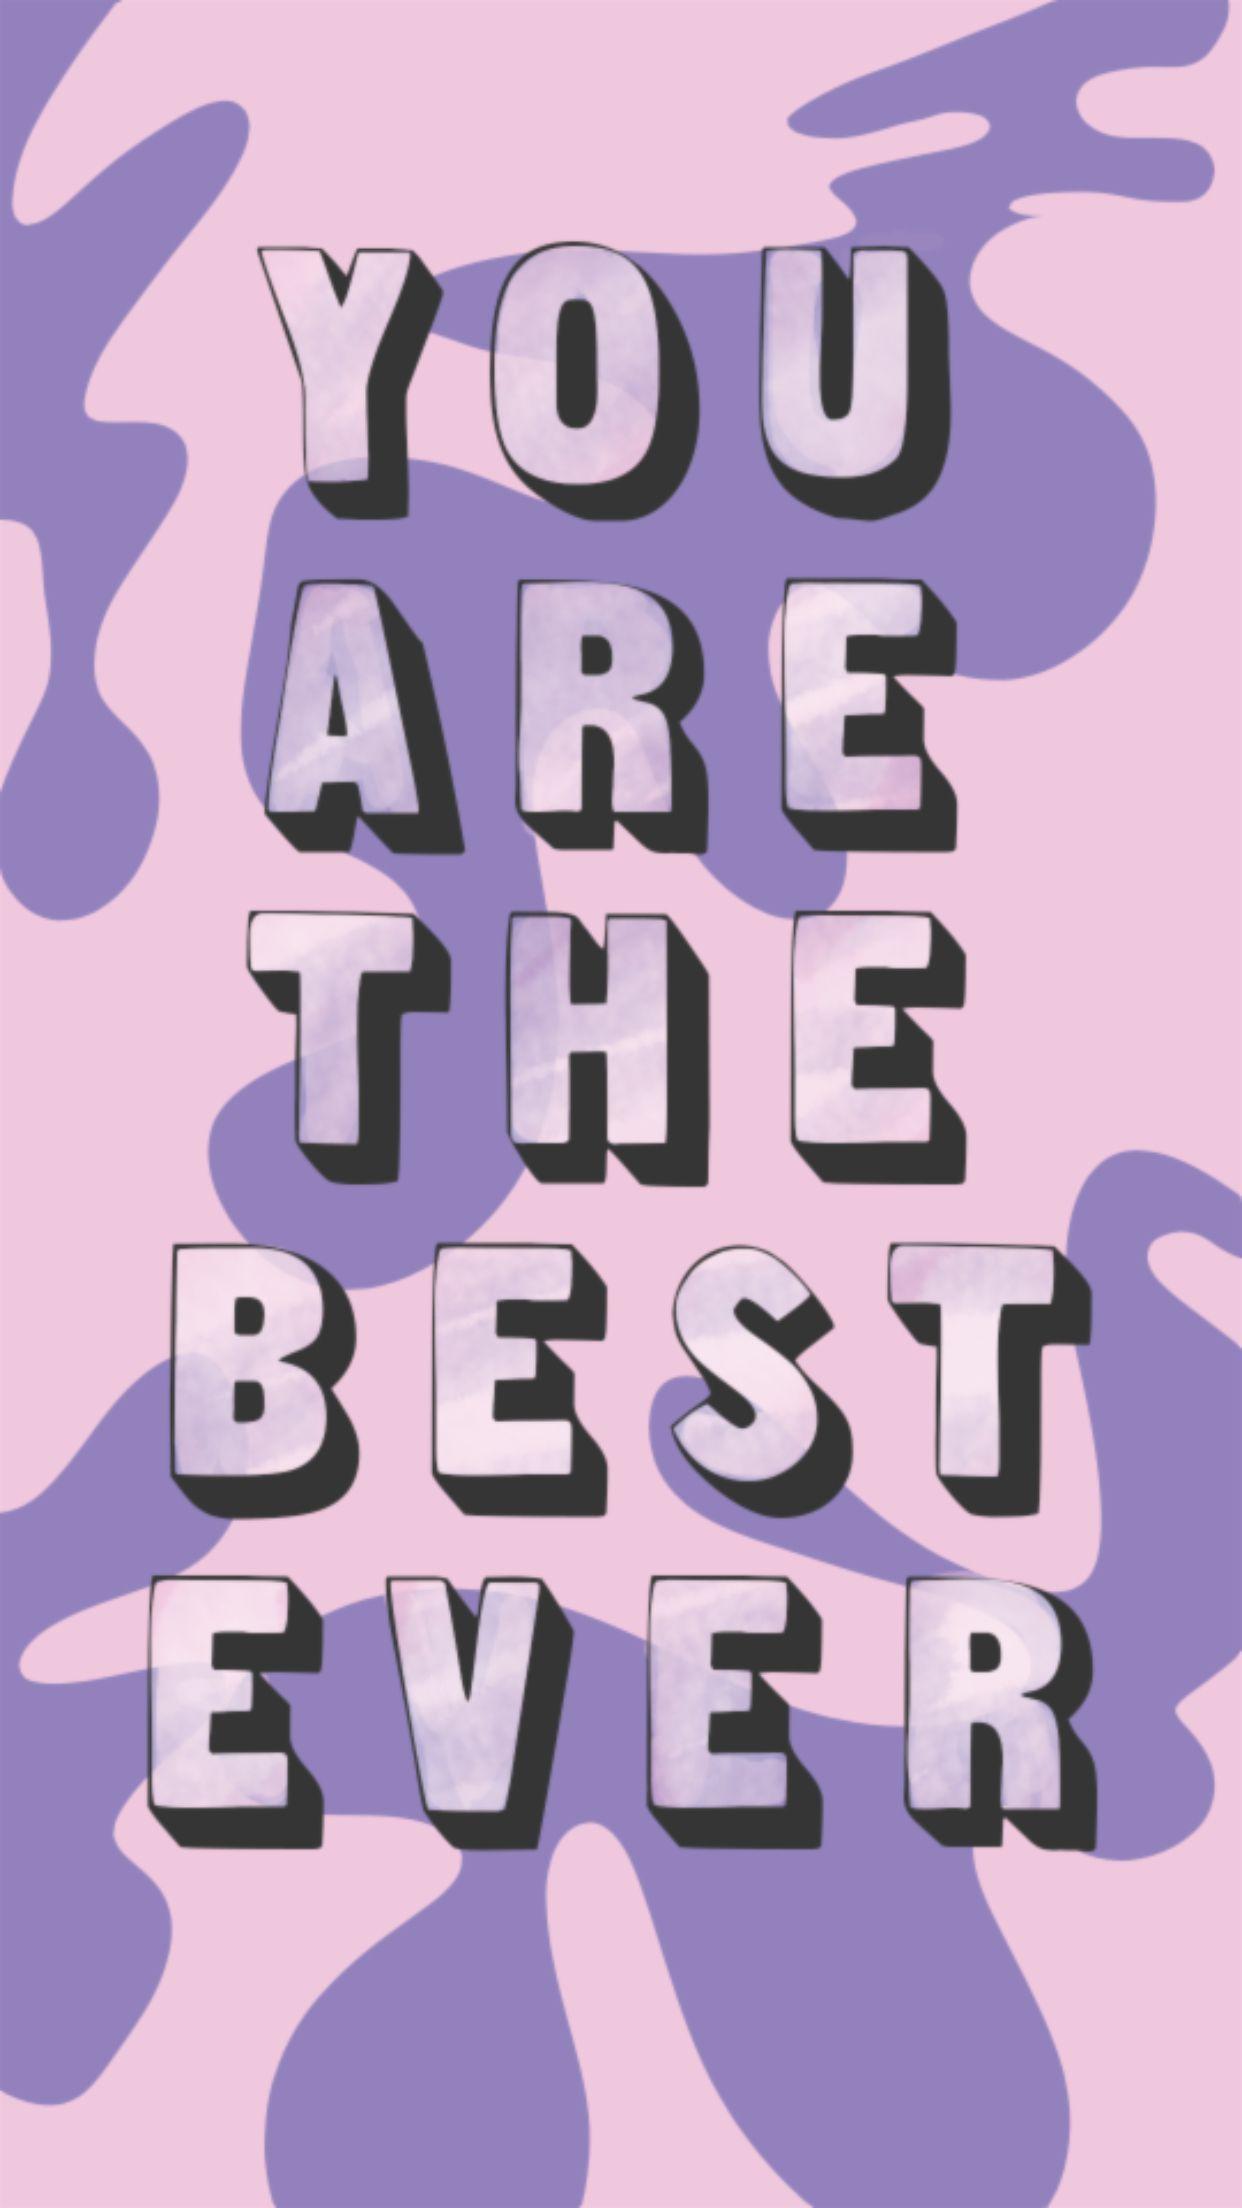 You are the best ever Lockscreen or Wallpaper Buzzfeed